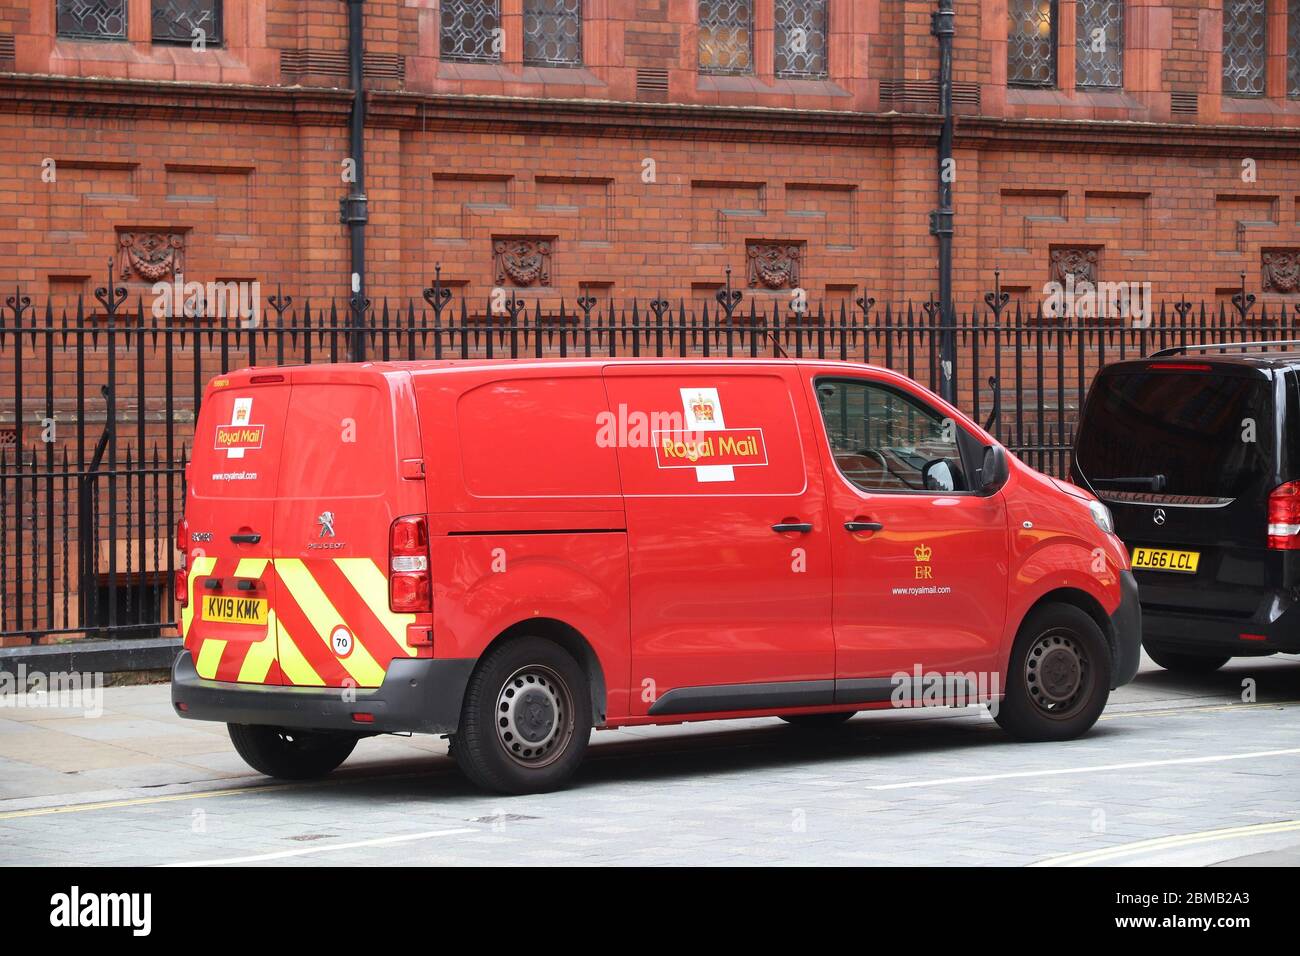 LONDON, UK - JULY 15, 2019: Royal Mail delivery van Peugeot Expert in London, UK. Royal Mail was founded in 1516. It employs 160,000 people. Stock Photo